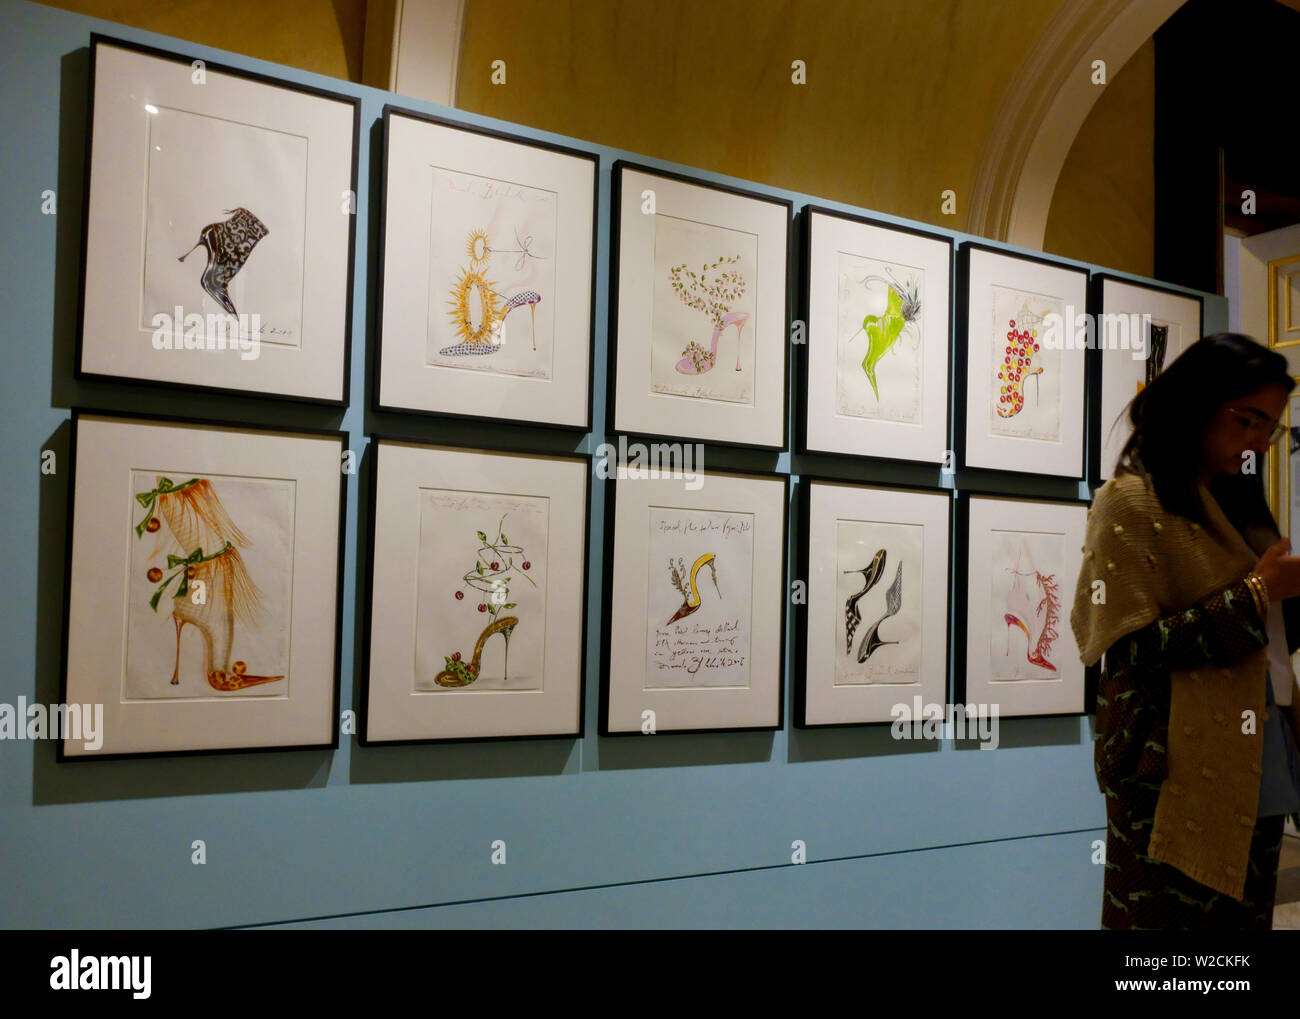 Manolo Blahnik sketches on display at the Wallace Collection London England UK Stock Photo